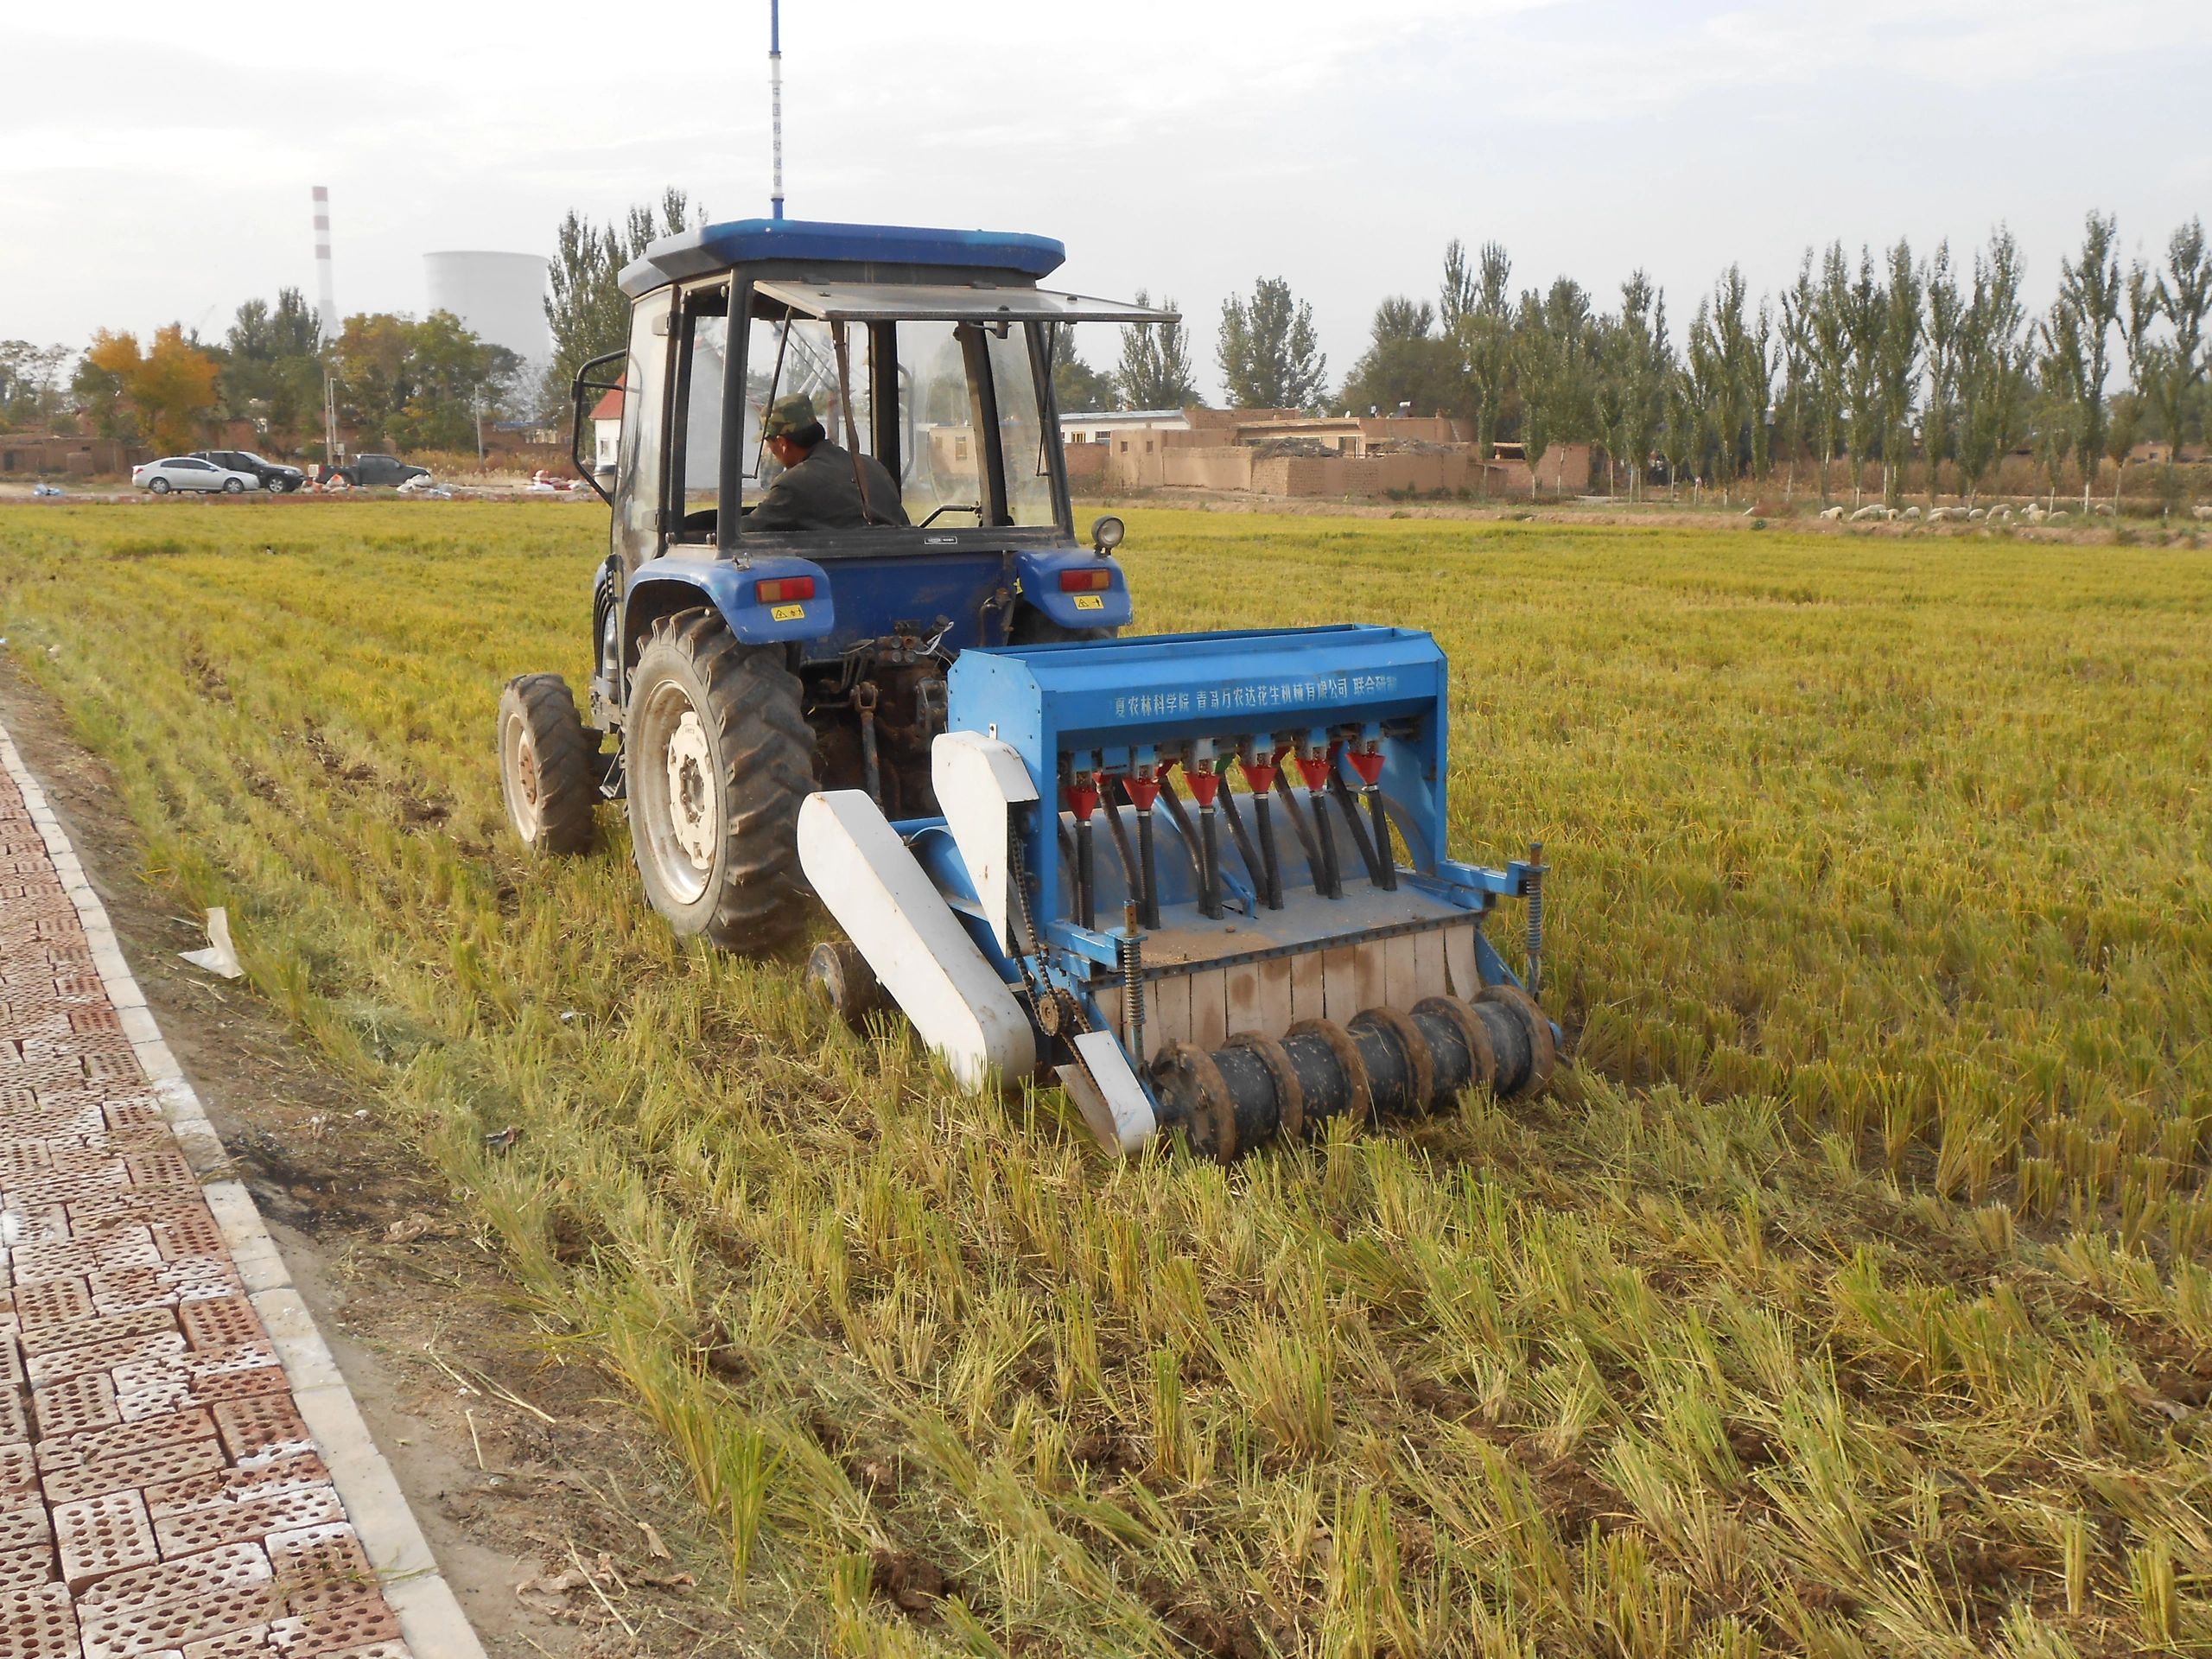 Happy seeder facilitates sustainable intensification by direct seeding wheat into rice residue.